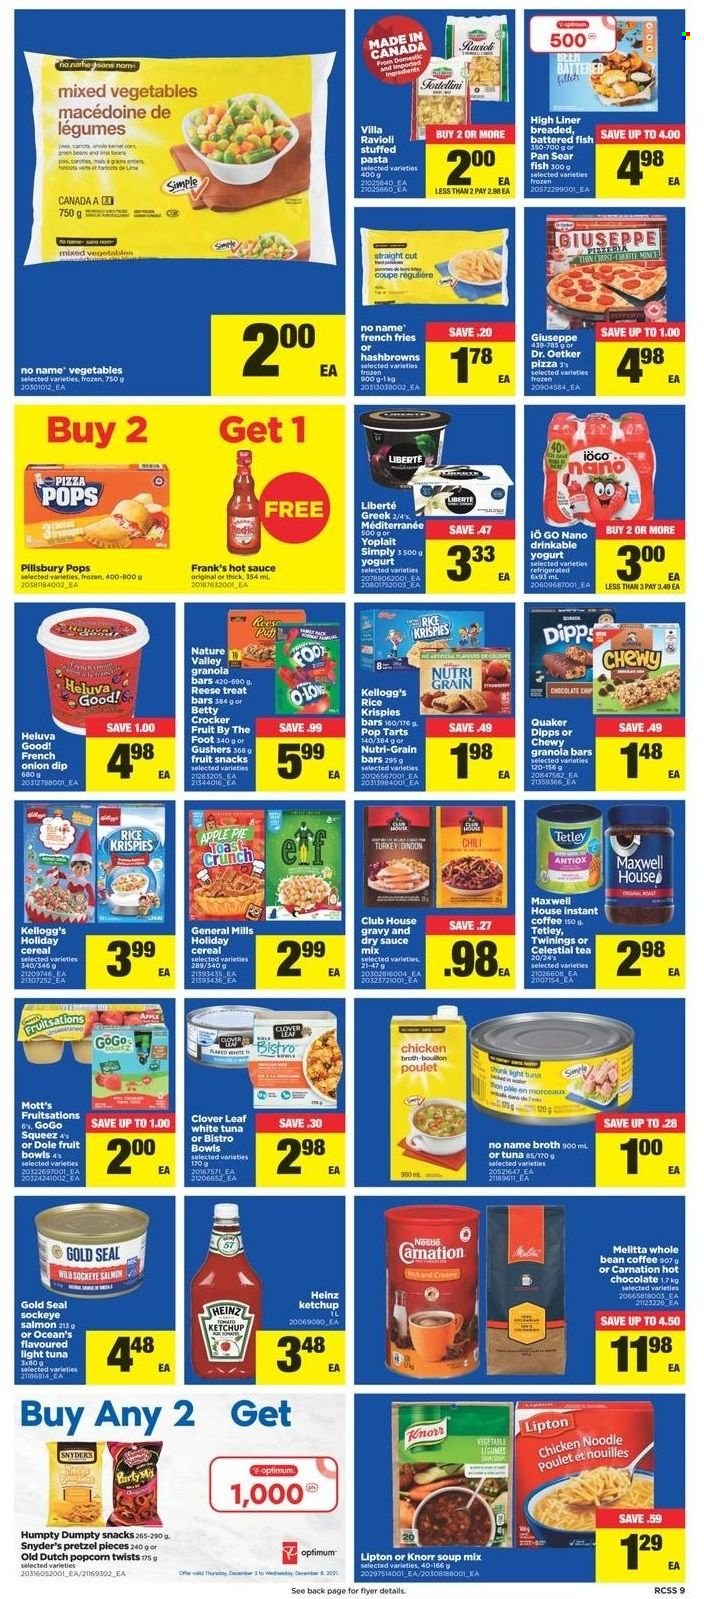 thumbnail - Real Canadian Superstore Flyer - December 02, 2021 - December 08, 2021 - Sales products - pretzels, apple pie, Dole, Mott's, salmon, tuna, fish, No Name, ravioli, pizza, soup mix, soup, pasta, Pillsbury, Quaker, noodles, Dr. Oetker, yoghurt, Clover, Yoplait, mixed vegetables, hash browns, potato fries, french fries, Kellogg's, Pop-Tarts, fruit snack, popcorn, chicken broth, broth, Heinz, light tuna, cereals, granola bar, Rice Krispies, Nutri-Grain, hot sauce, hot chocolate, Maxwell House, tea, Twinings, instant coffee, beer, pan, Optimum, Knorr, ketchup, Lipton. Page 9.